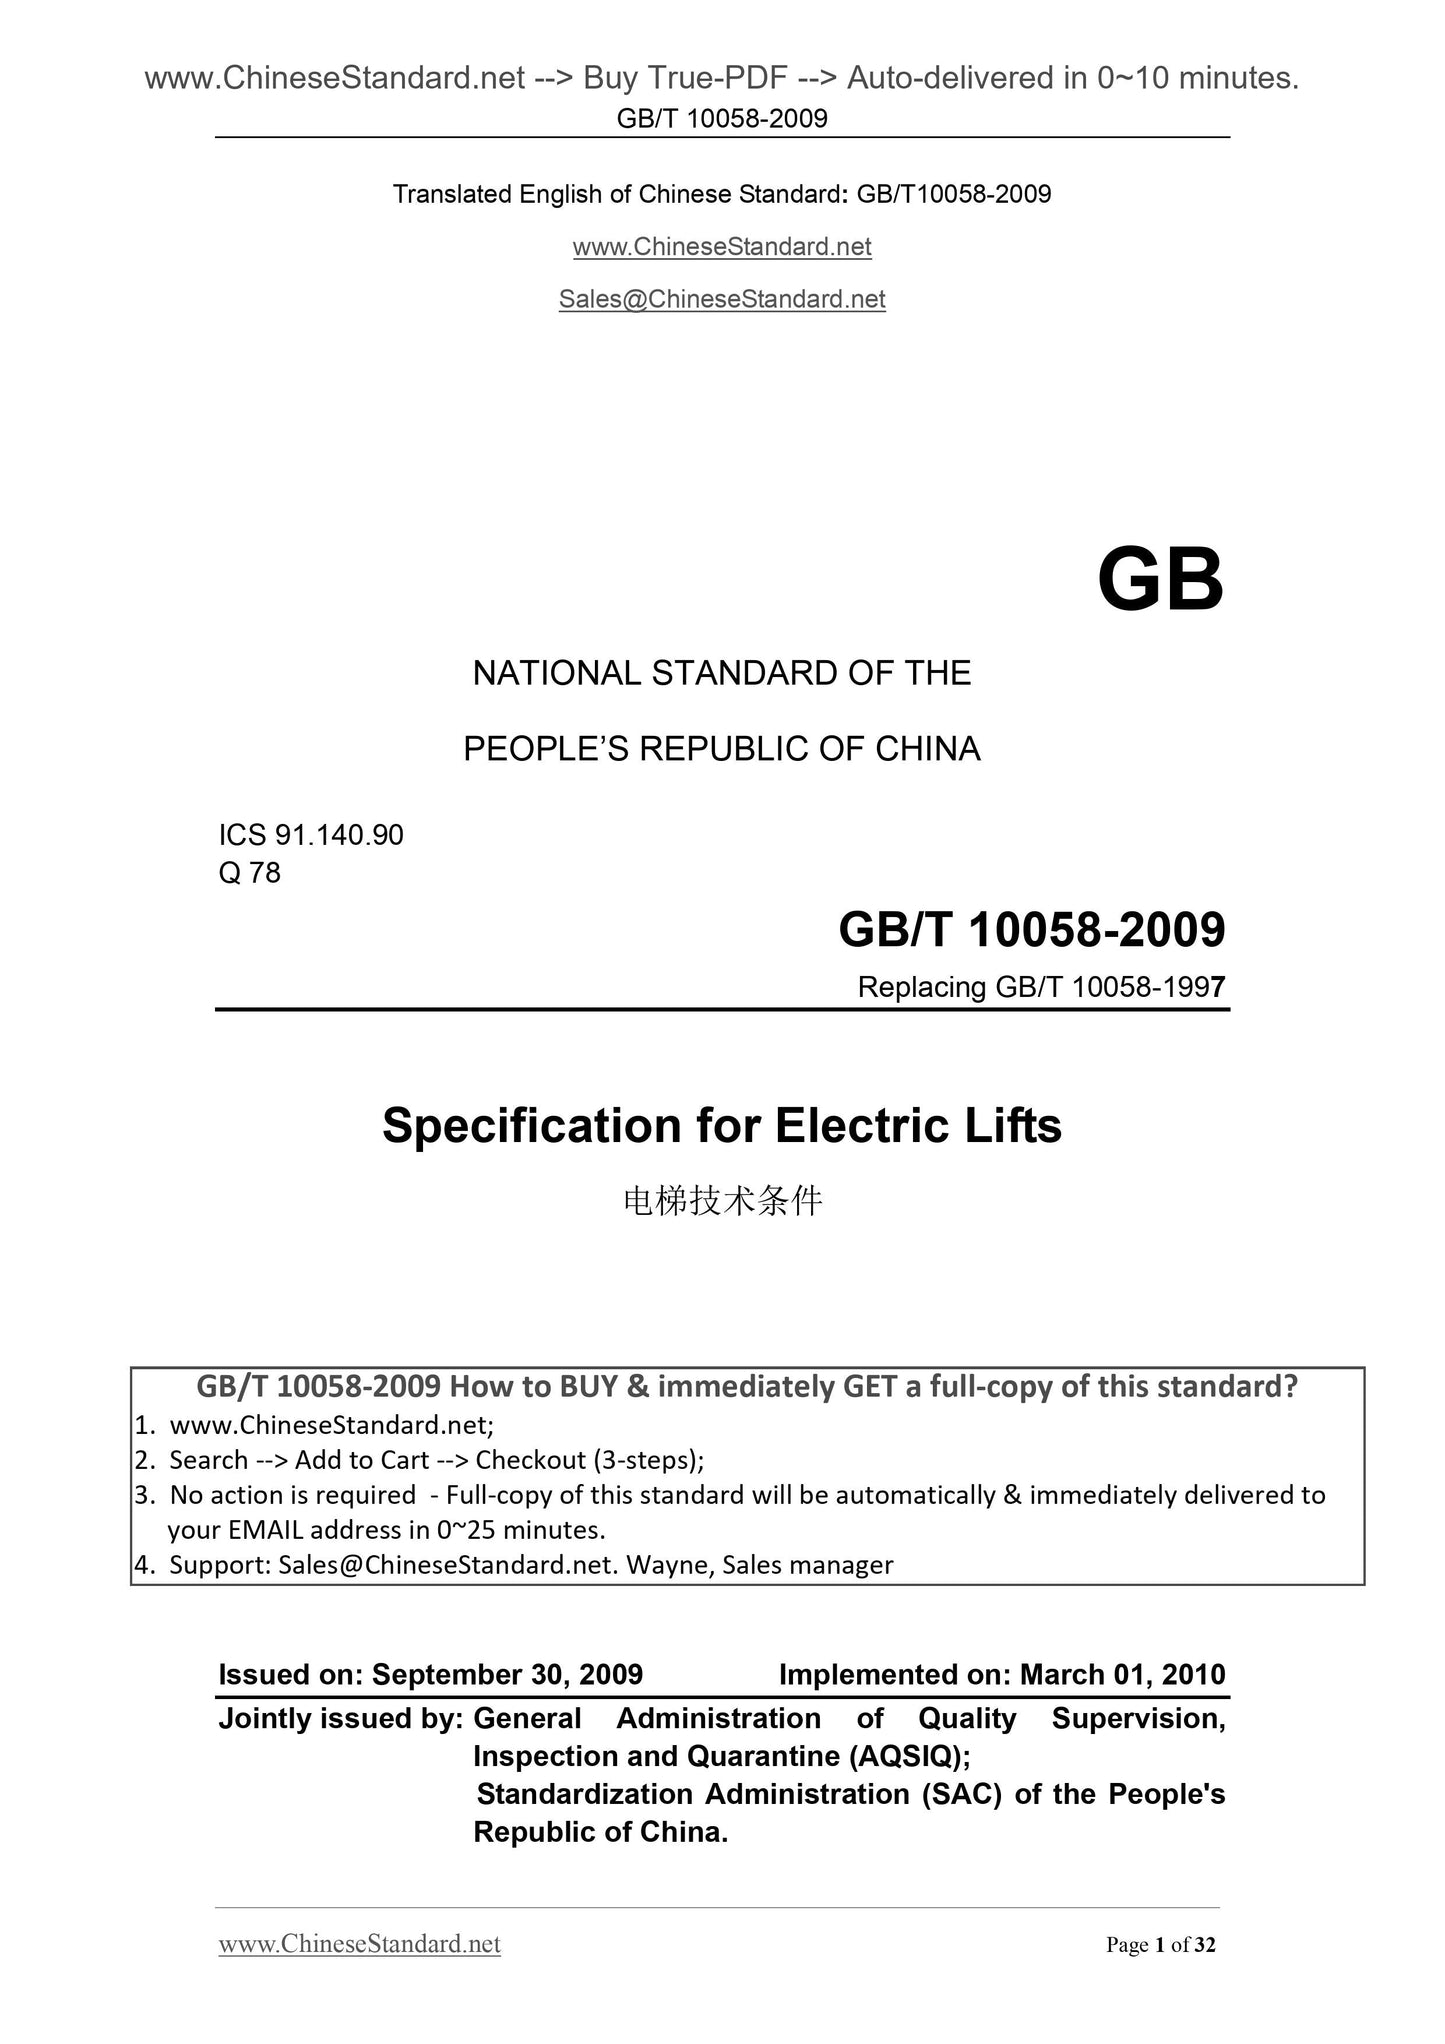 GB/T 10058-2009 Page 1